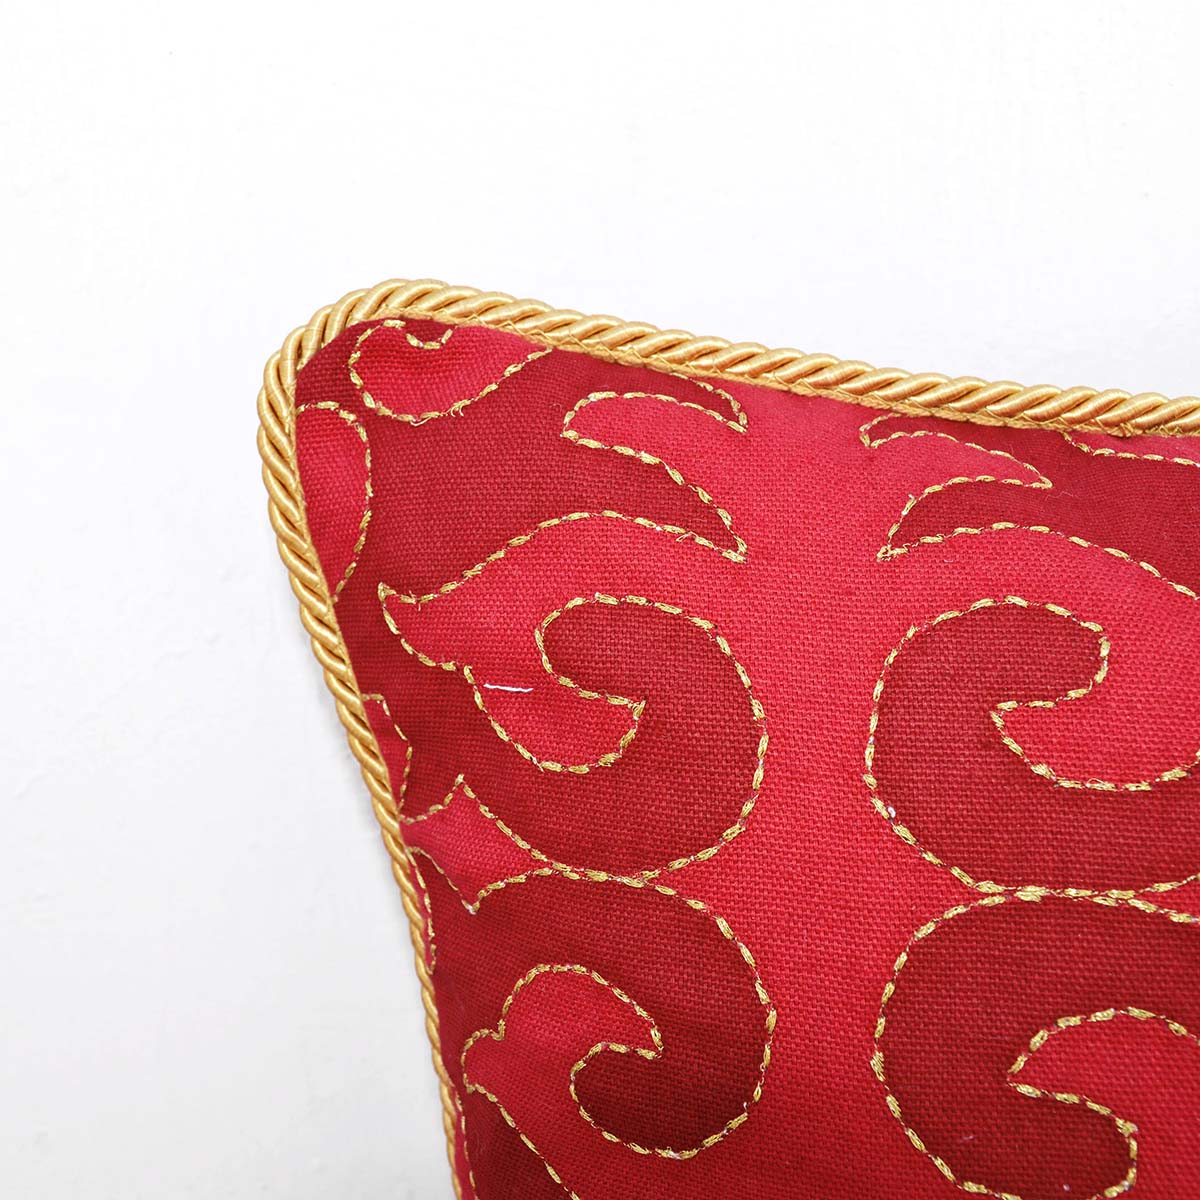 Christmas Red pillow cover, moroccan print, twisted chord piping and embroidery